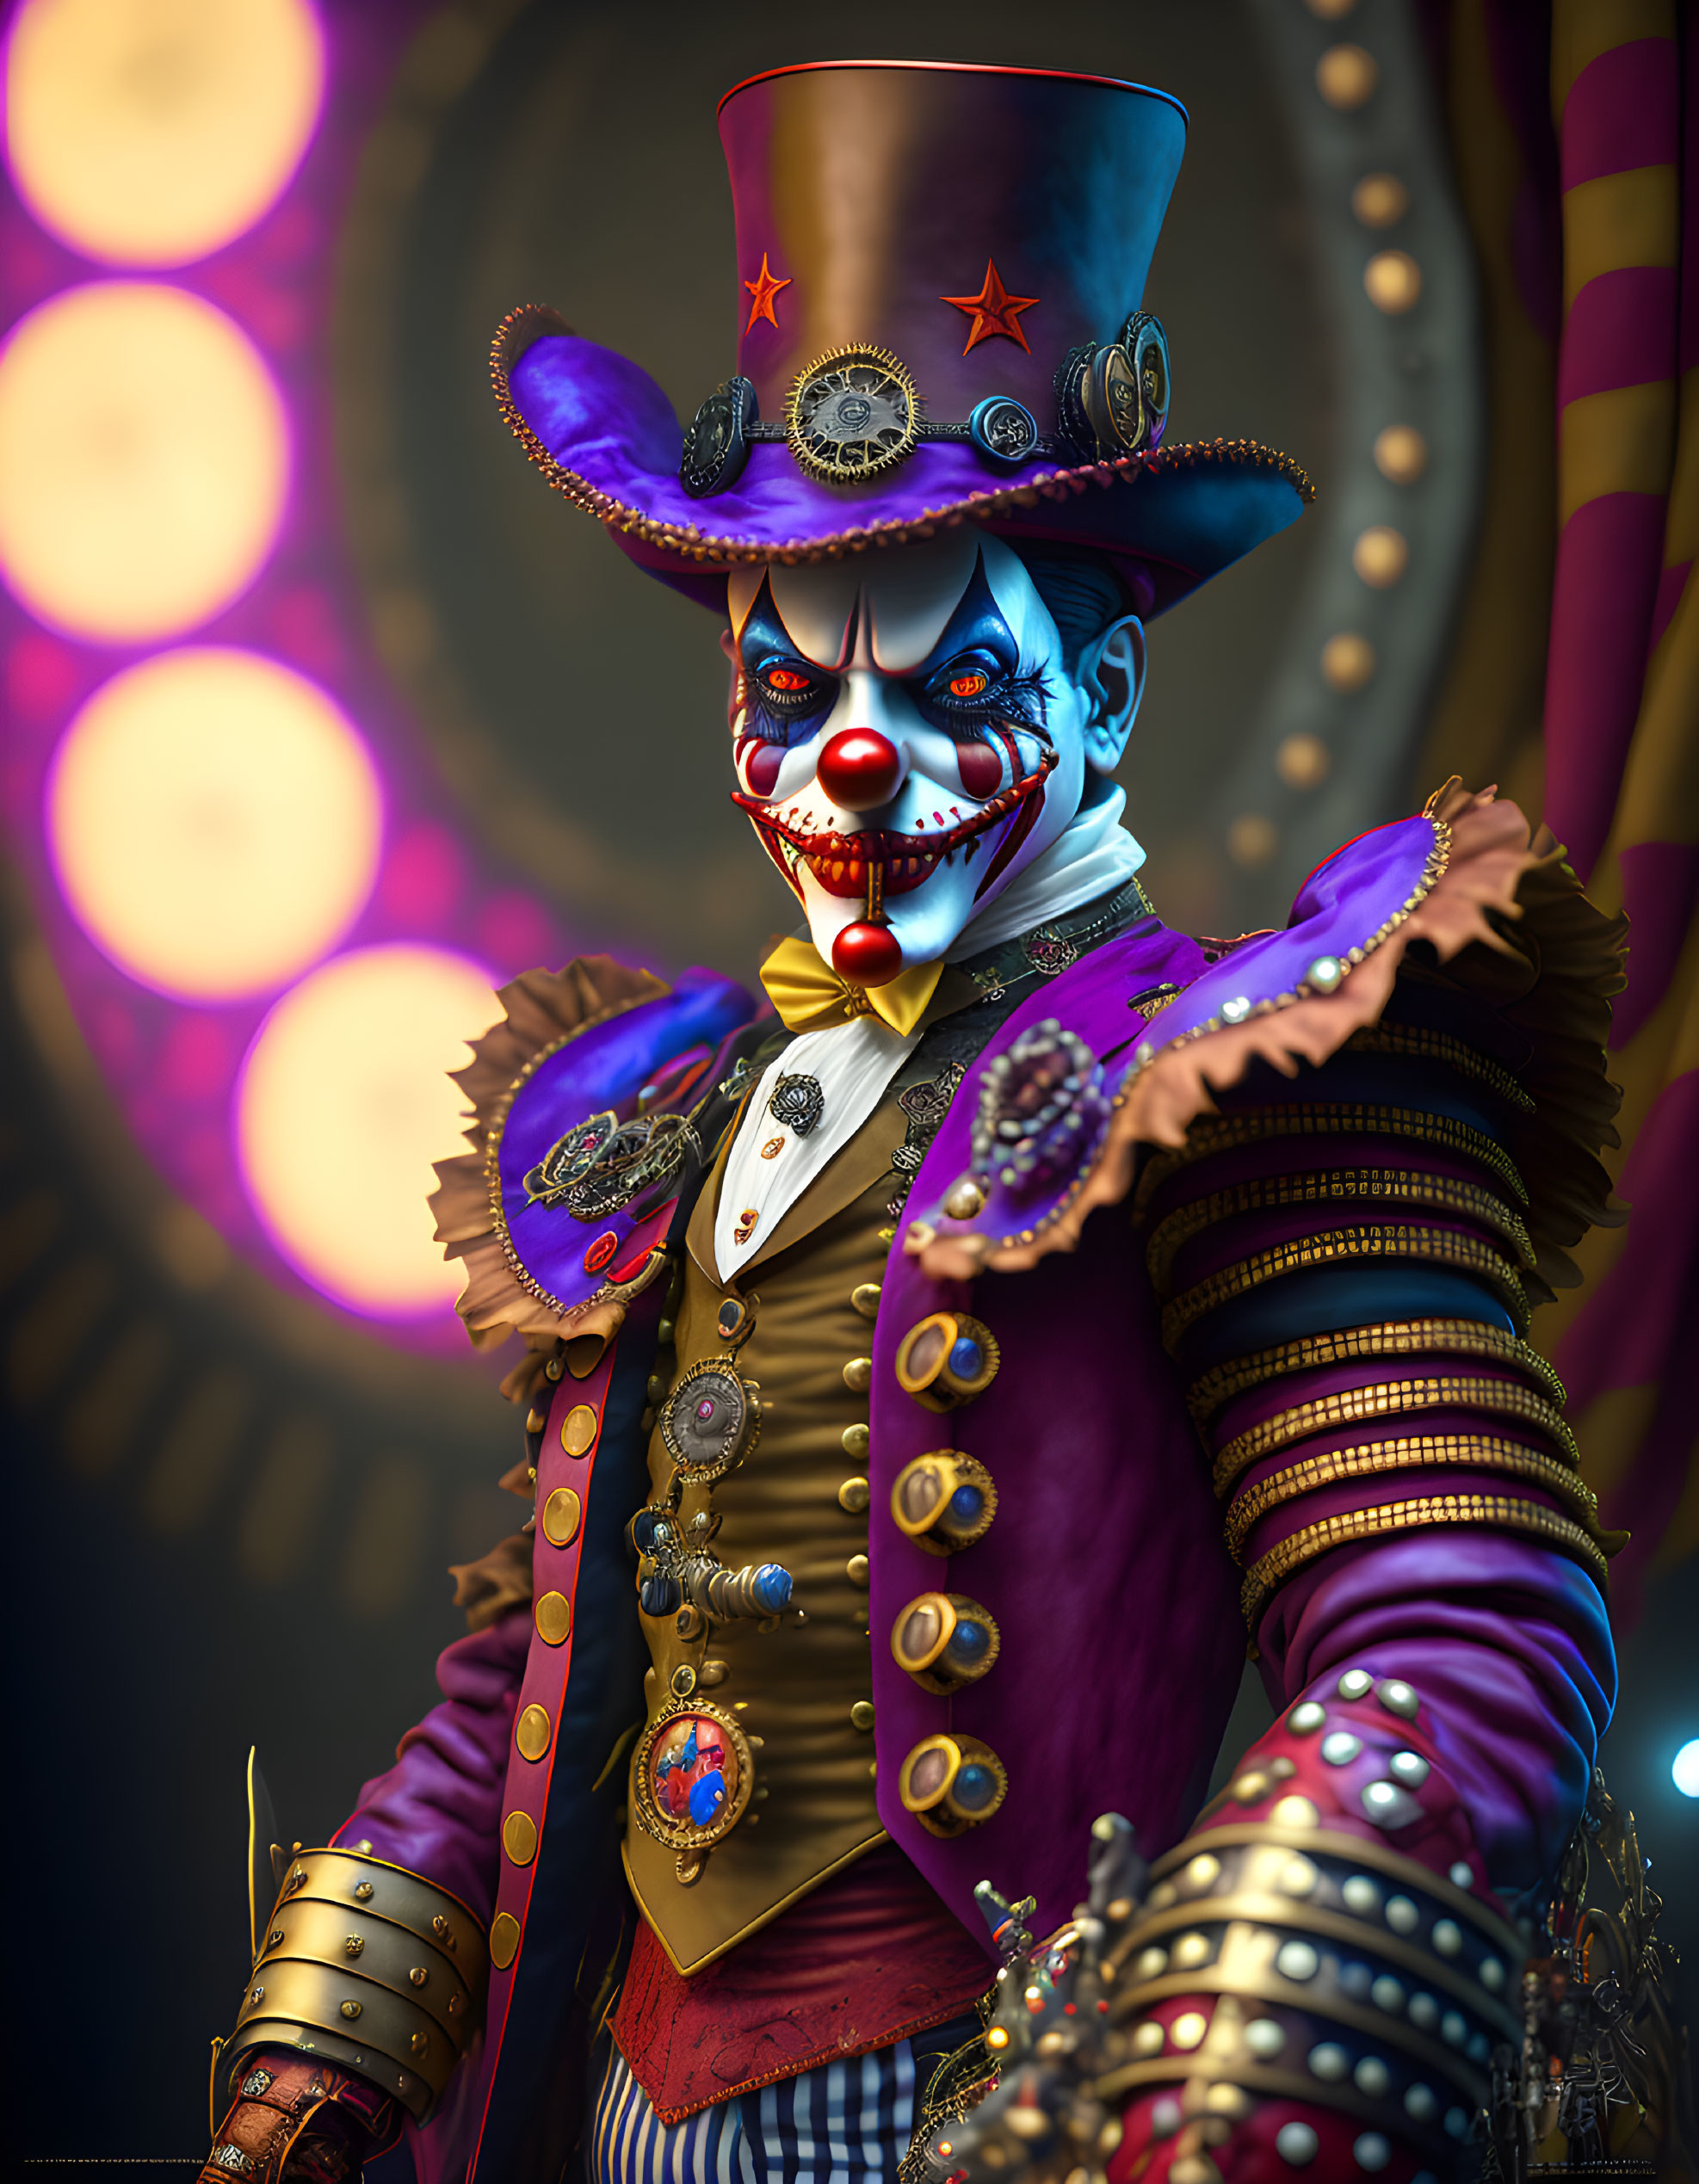 Menacing clown in purple and gold costume with top hat against circus tent backdrop